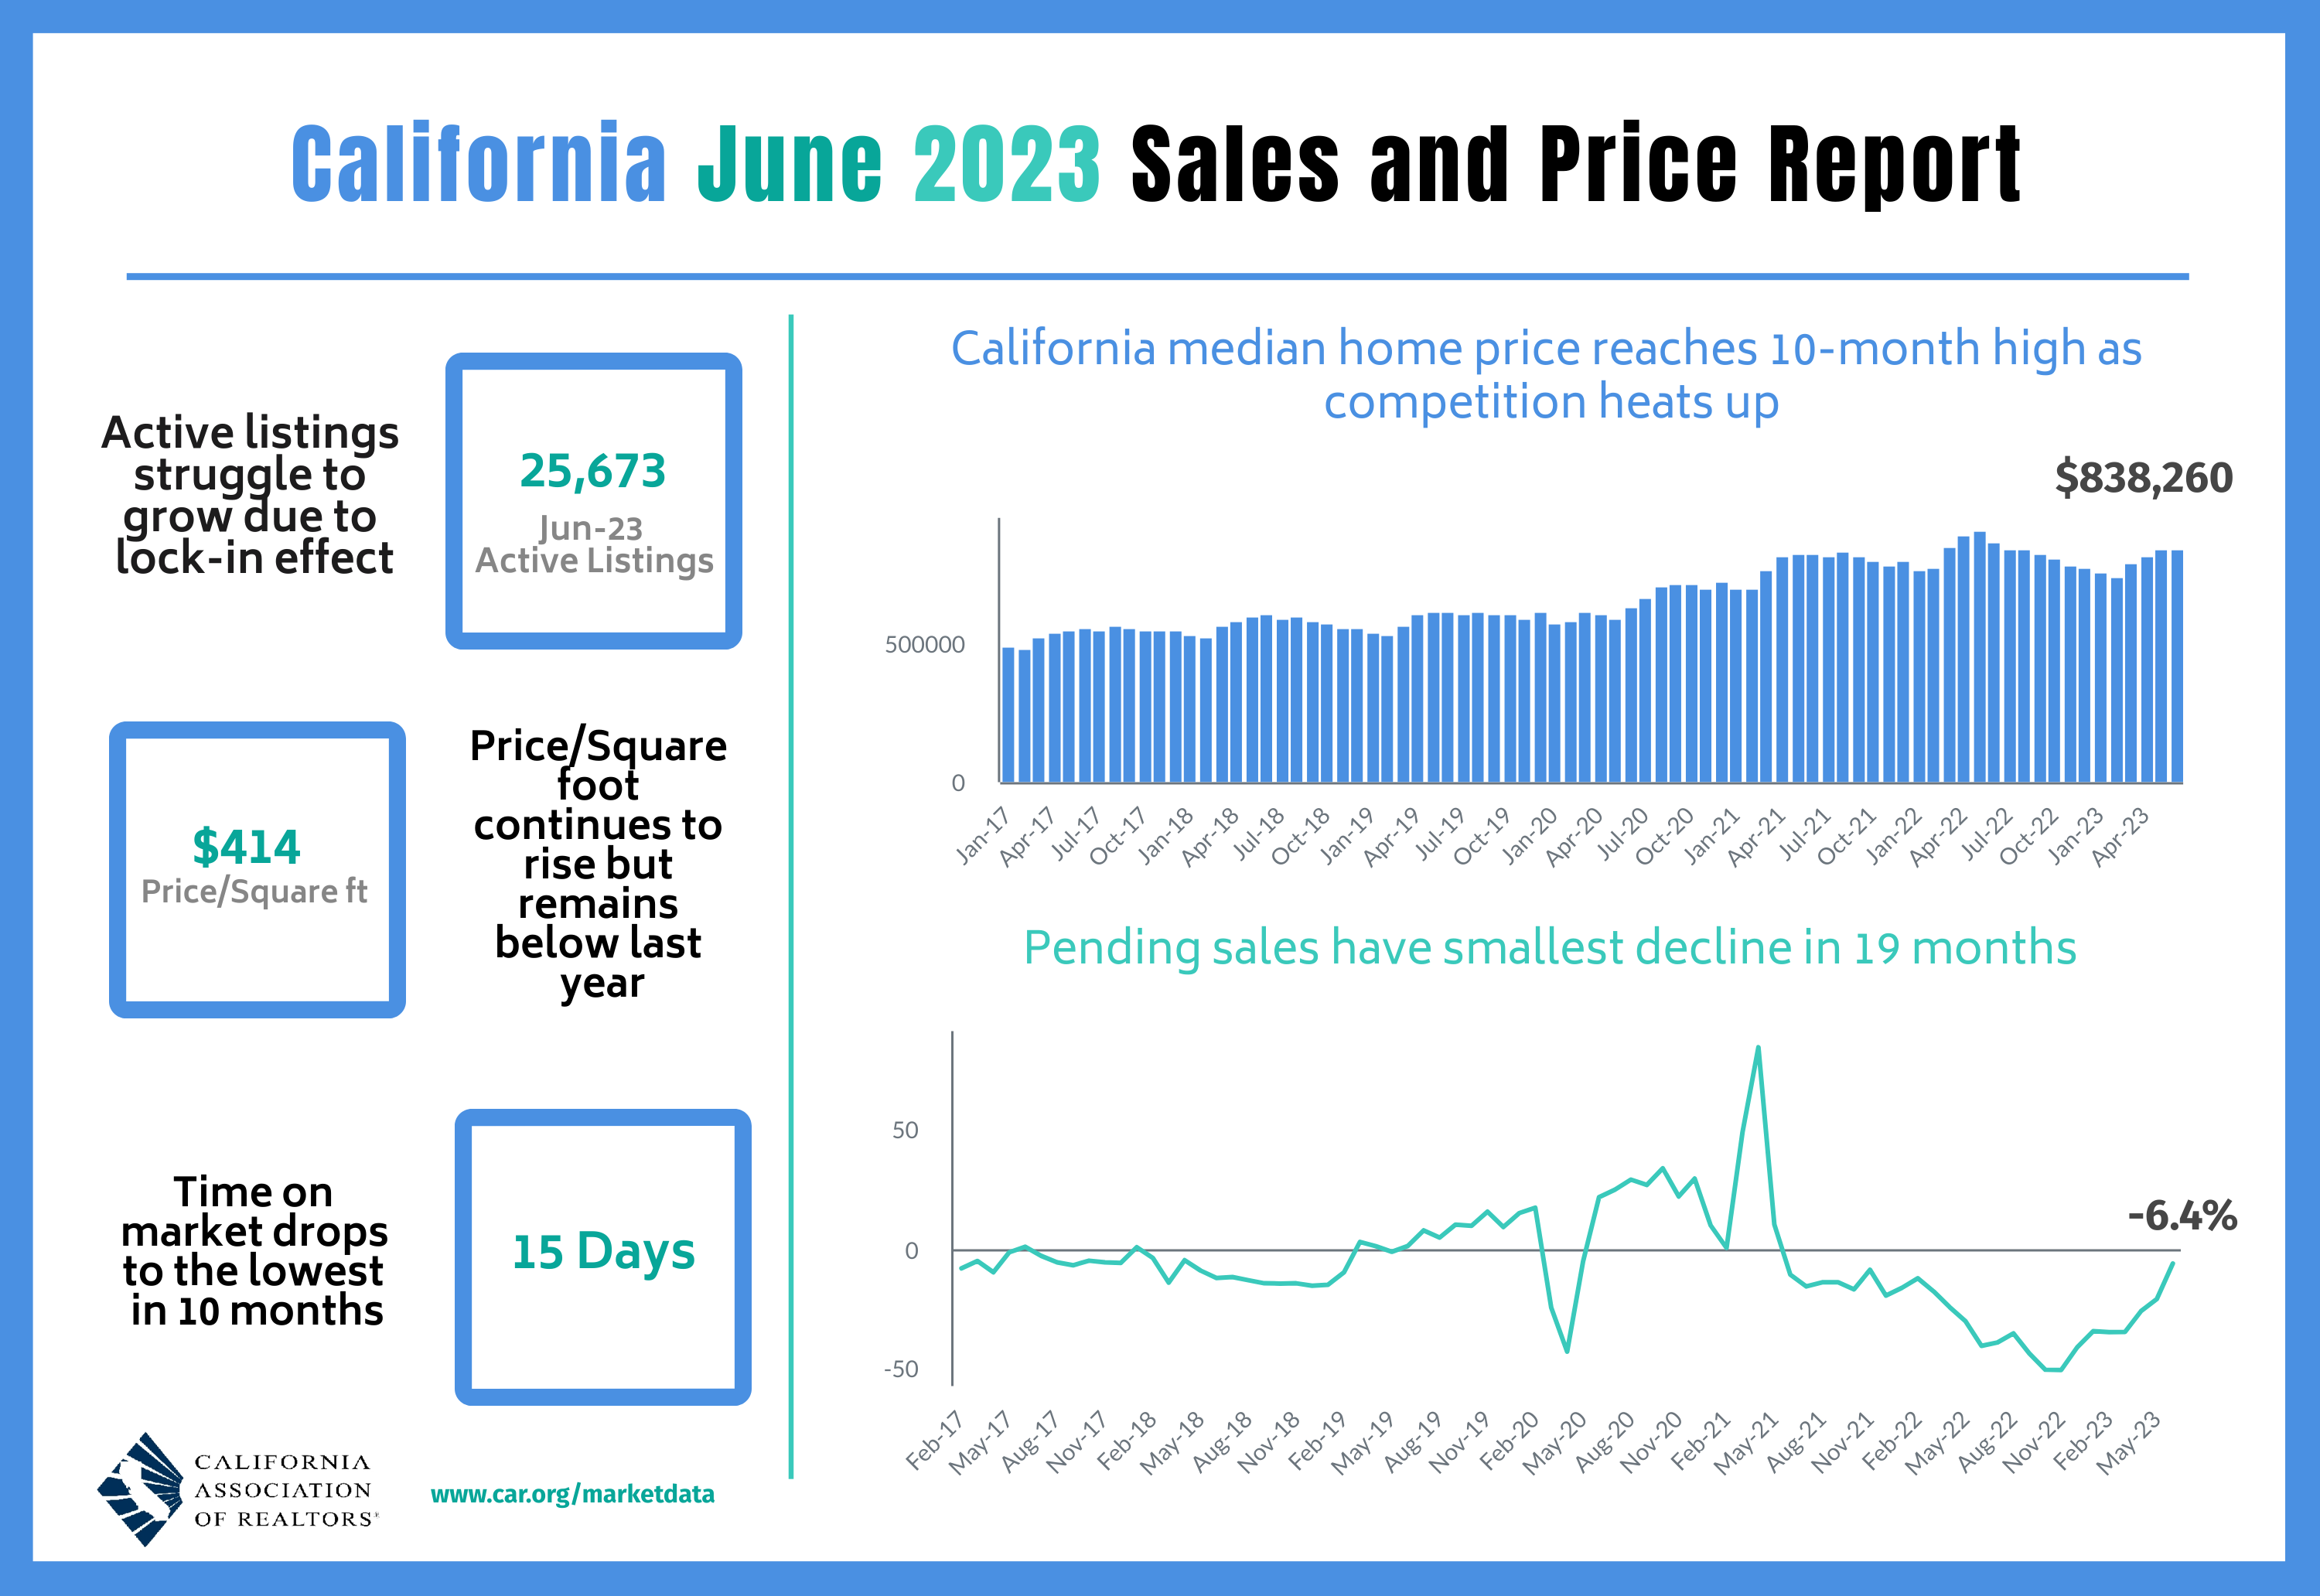 Elevated interest rates and limited new listings suppress California home sales in June